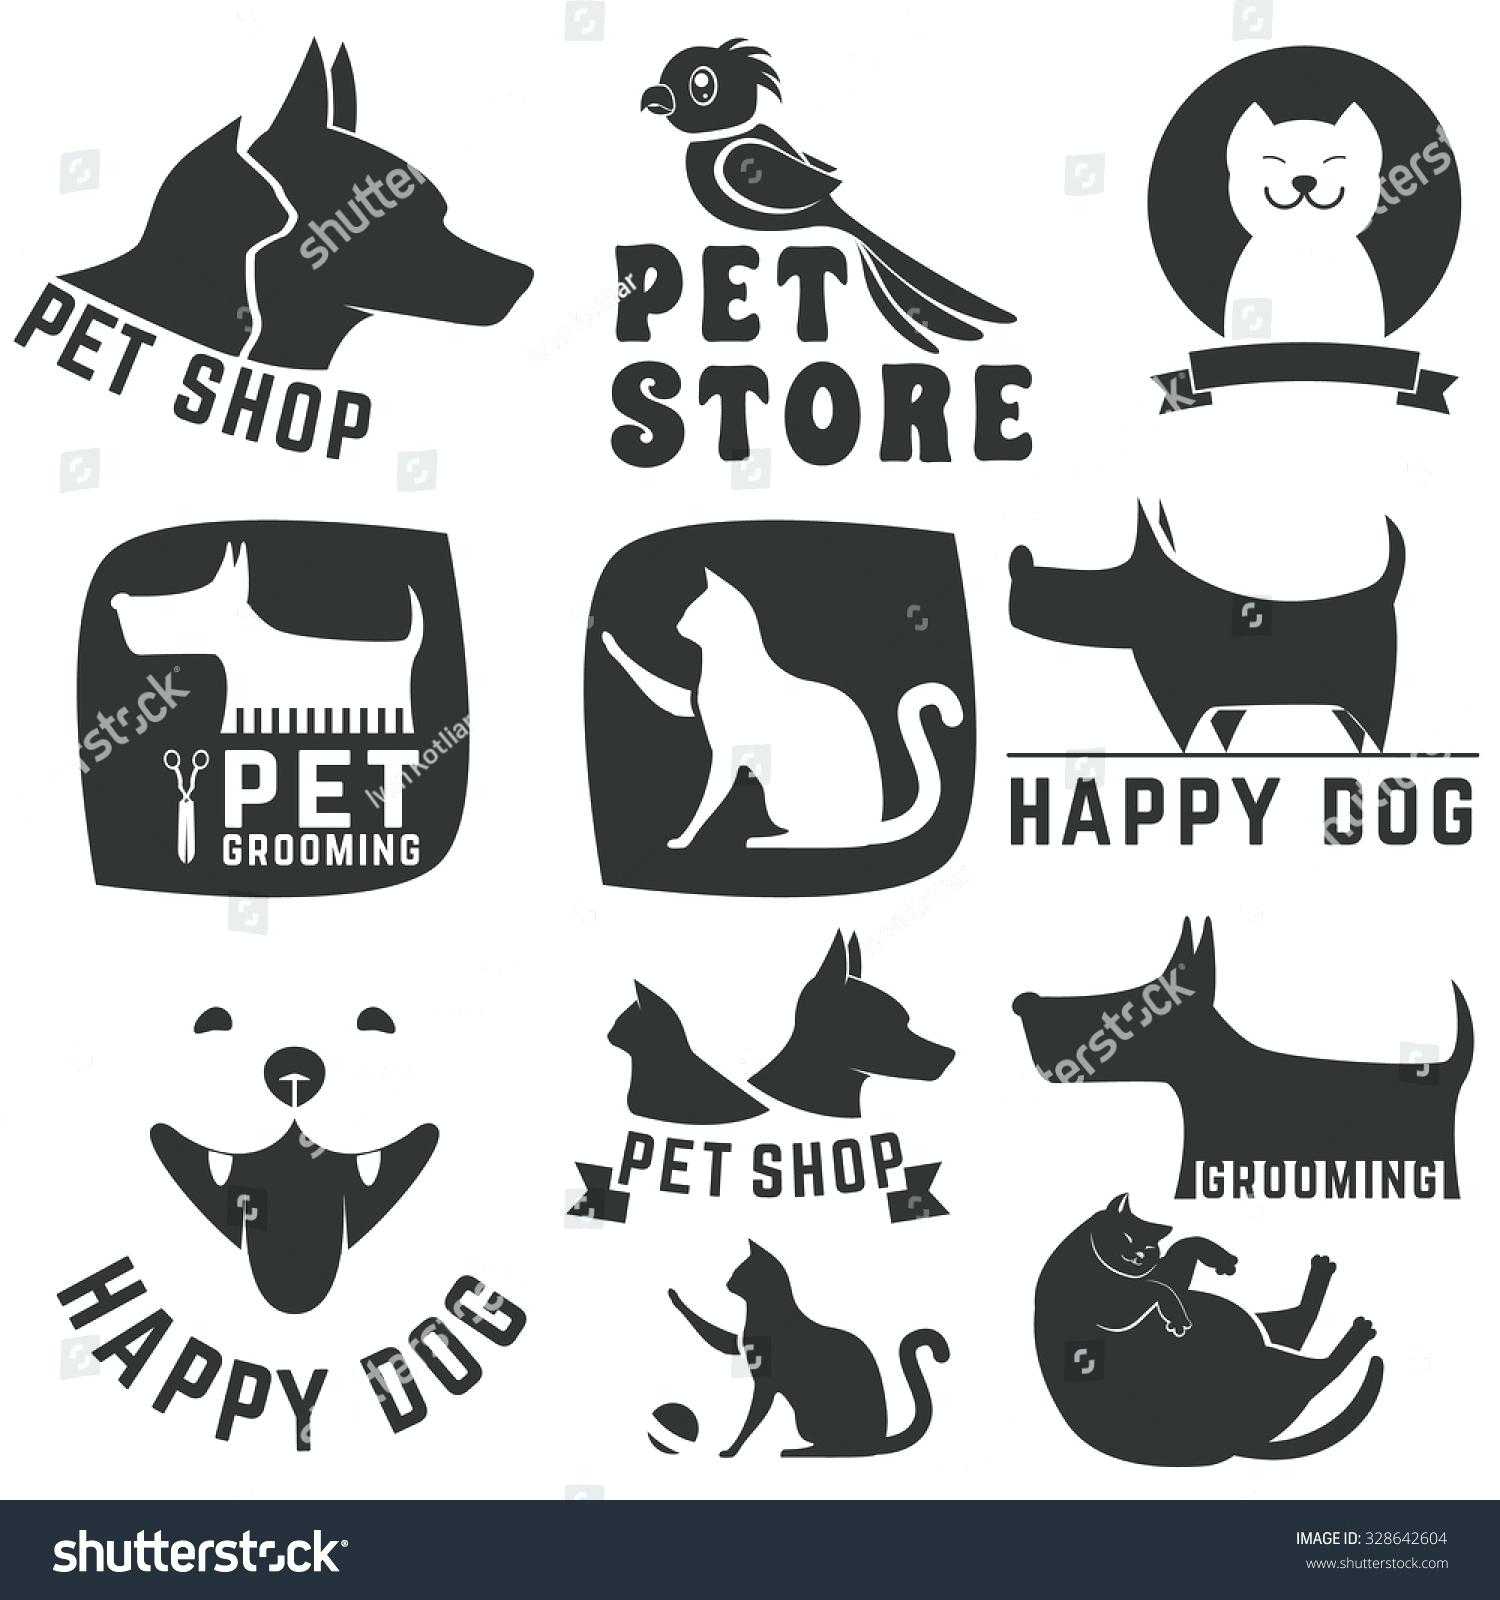 The Best Free Treat Vector Images. Download From 29 Free Throughout Dog Treat Label Template